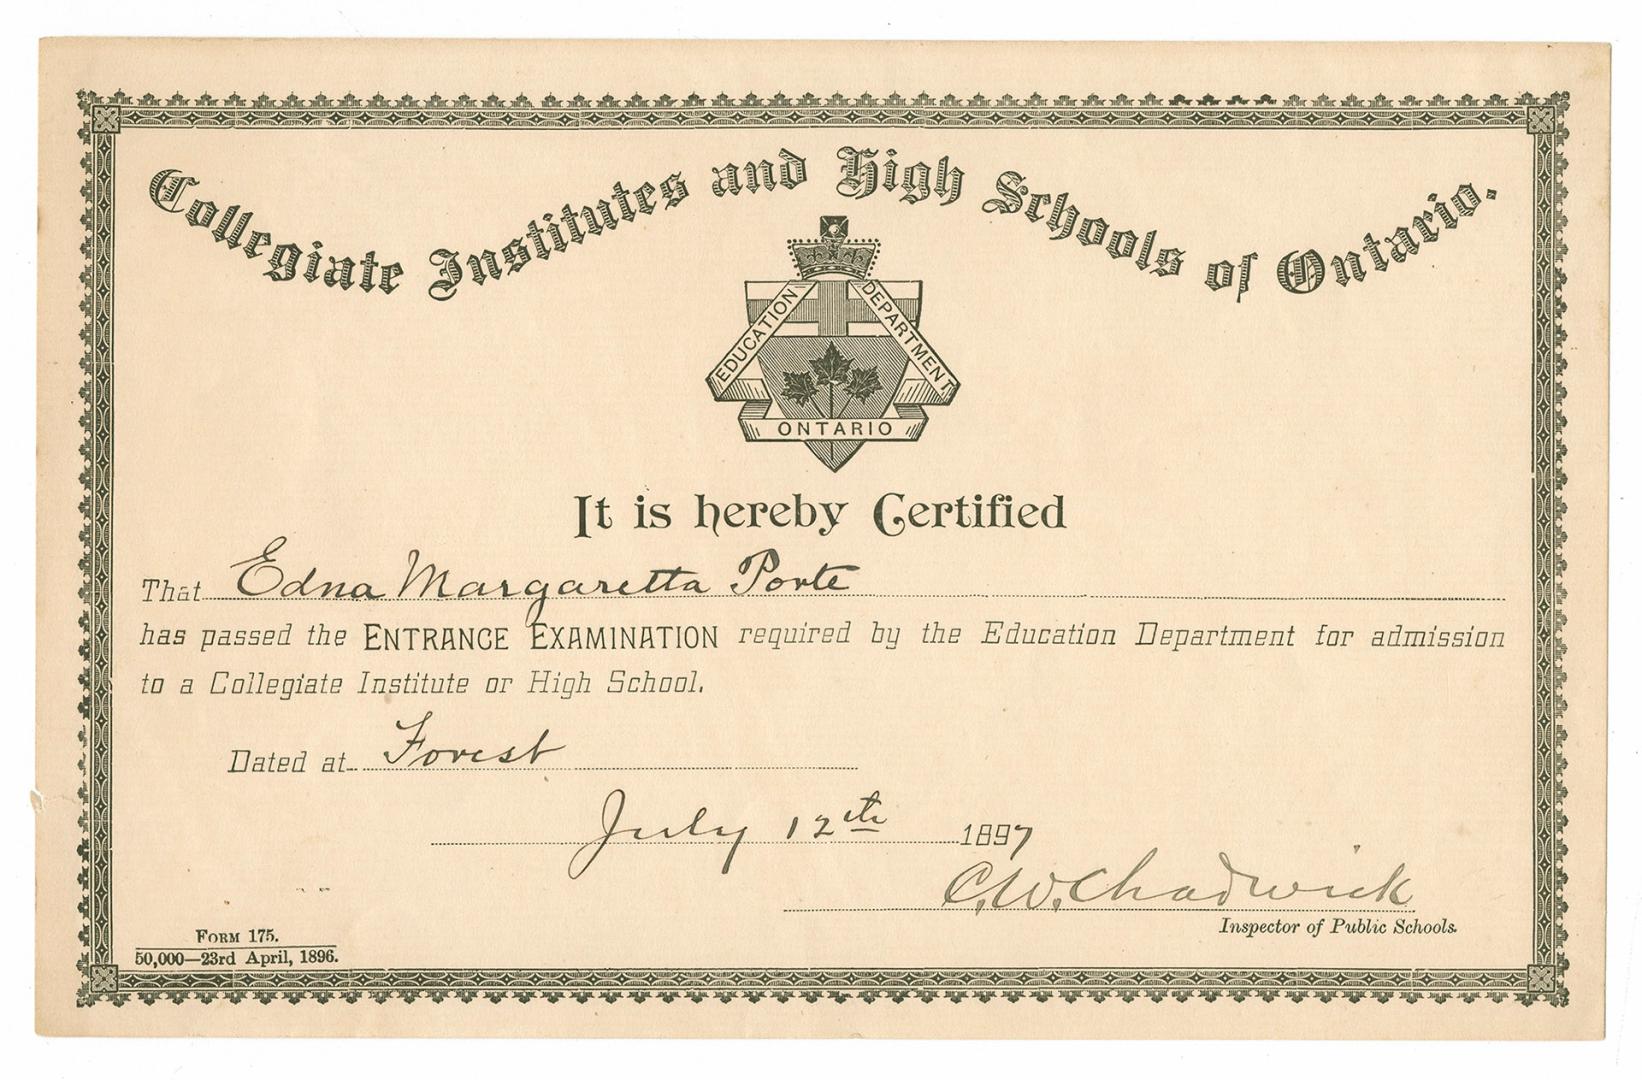 It is hereby certified that [Edna Margaretta Porte] as passed the entrance examination required by the education department for admission to a collegiate institute or high school